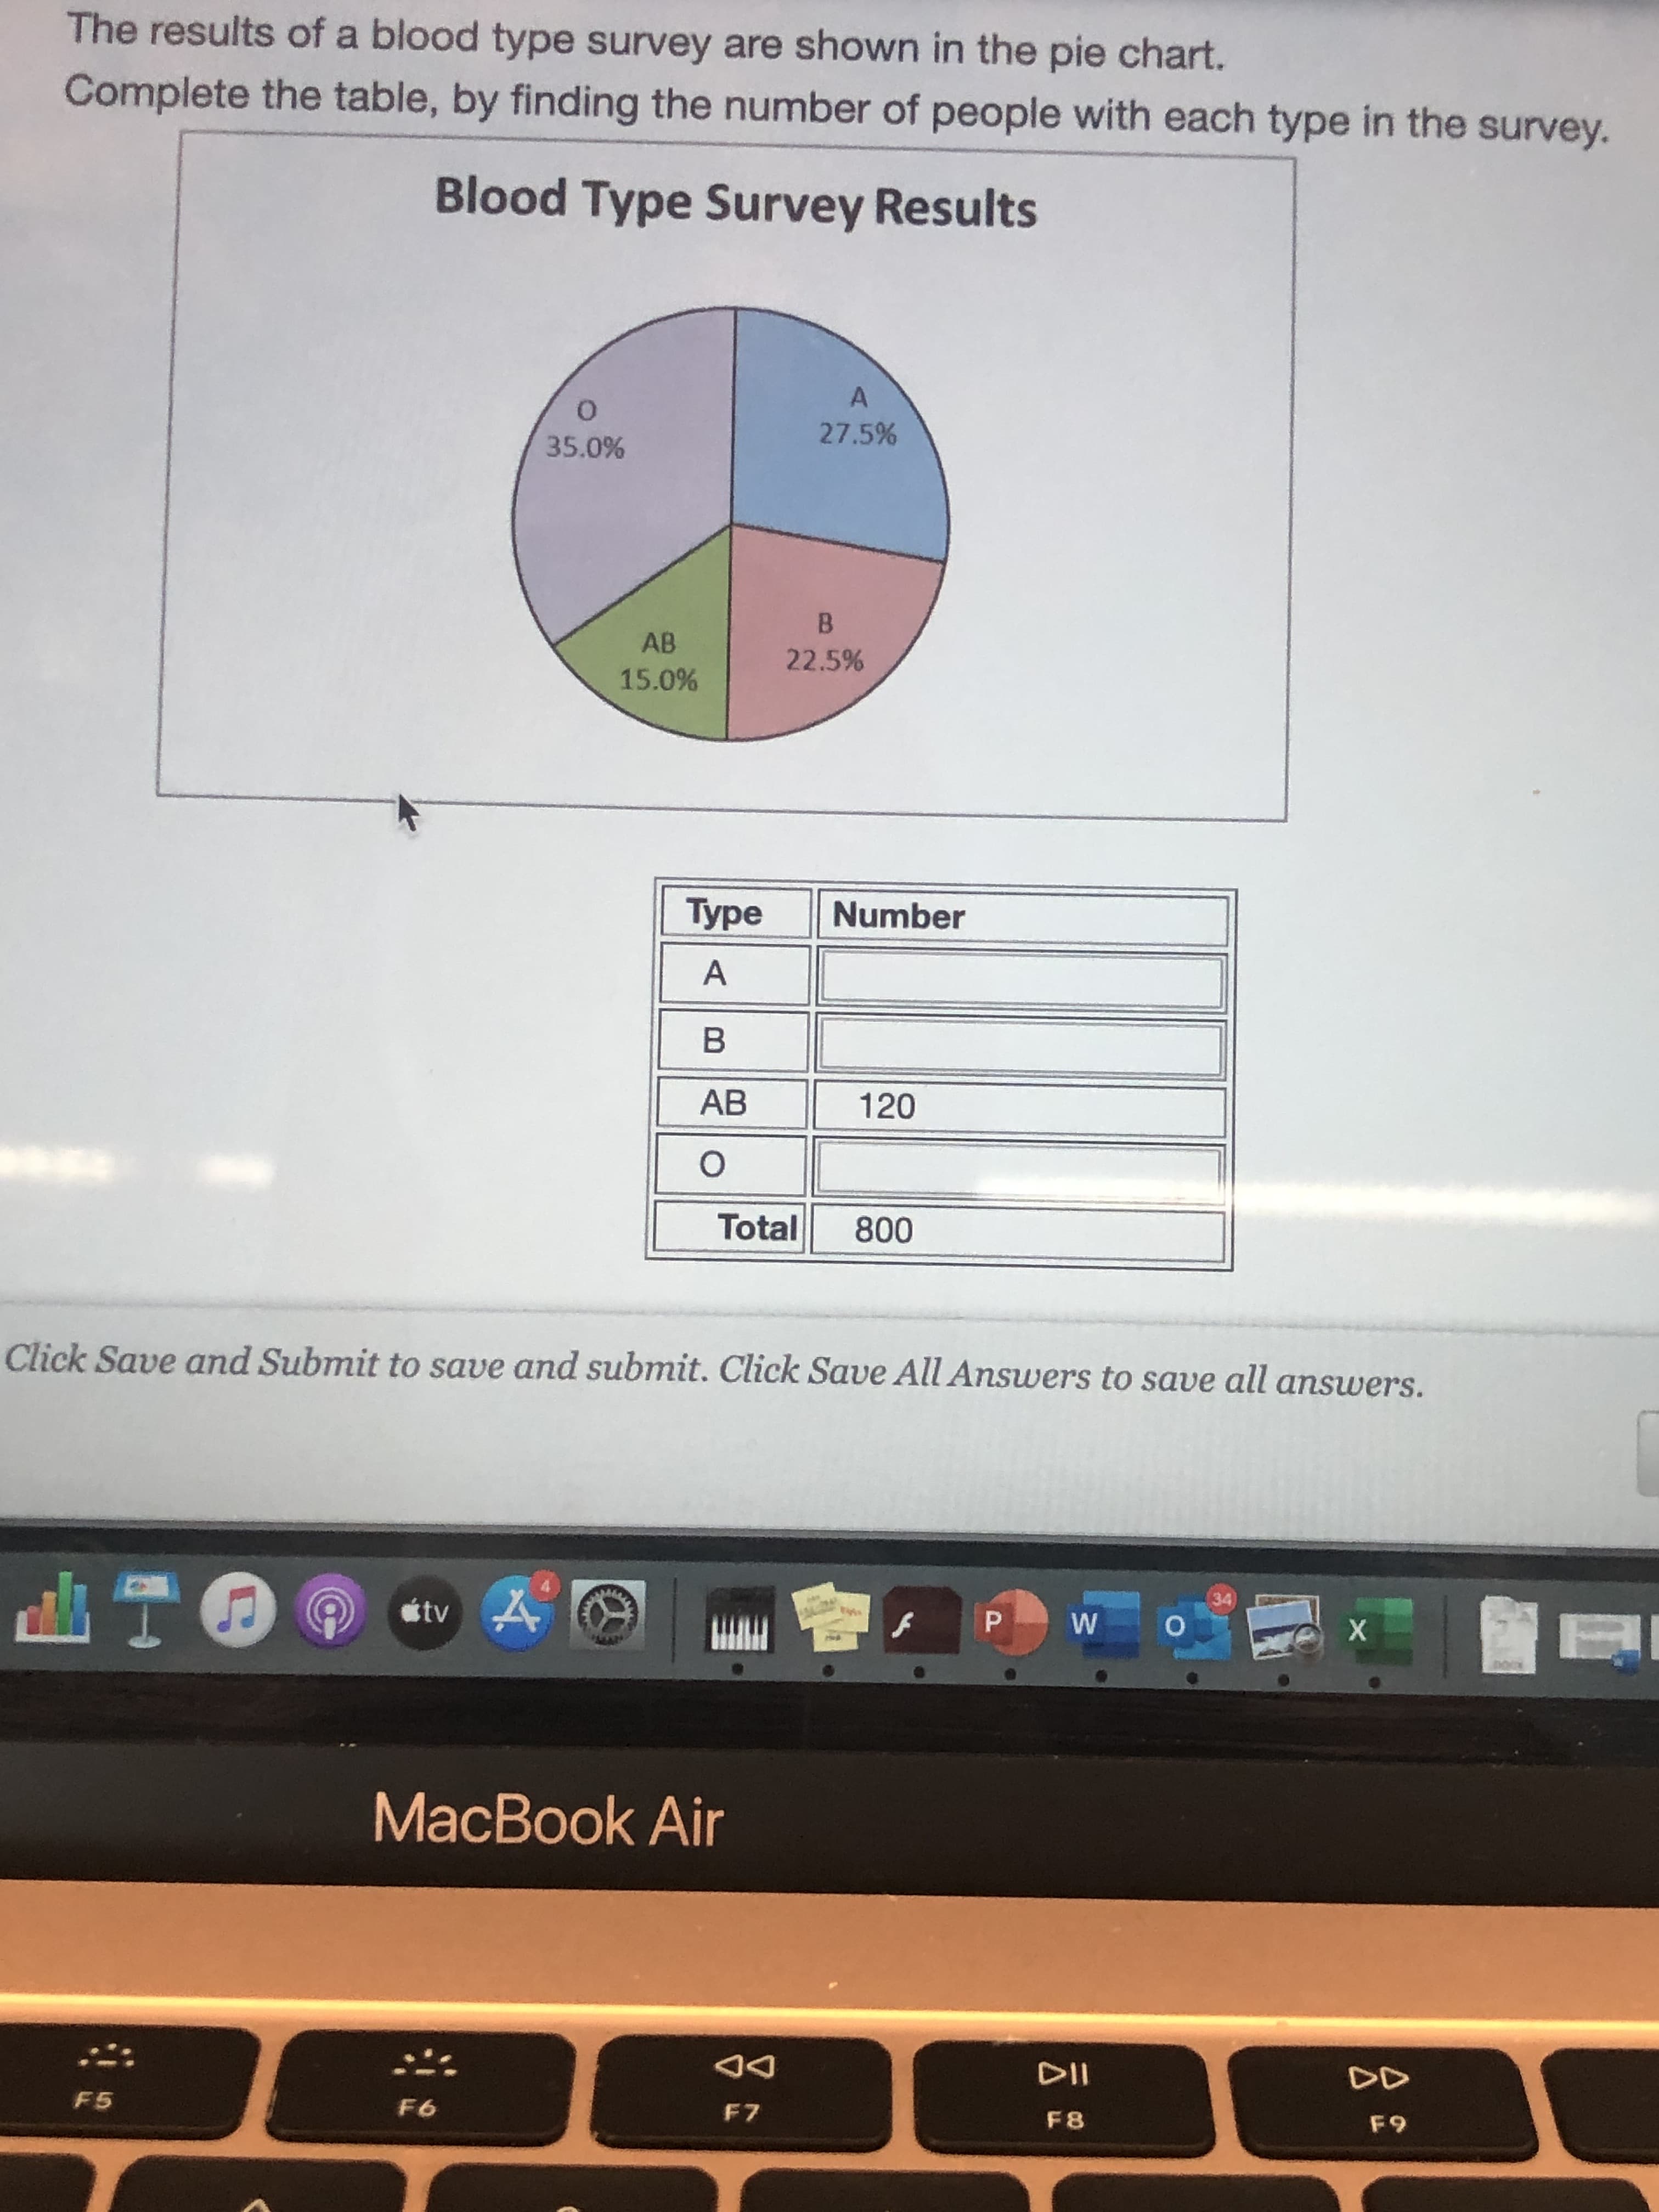 The results of a blood type survey are shown in the pie chart.
Complete the table, by finding the number of people with each type in the survey.
Blood Type Survey Results
27.5%
35.0%
AB
22.5%
15.0%
Type
Number
AB
120
Total
800
Click Save and Submit to save and submit. Click Save All Answers to save all answers.
ATO
34
tv A
MacBook Air
F5
F6
F8
F9
